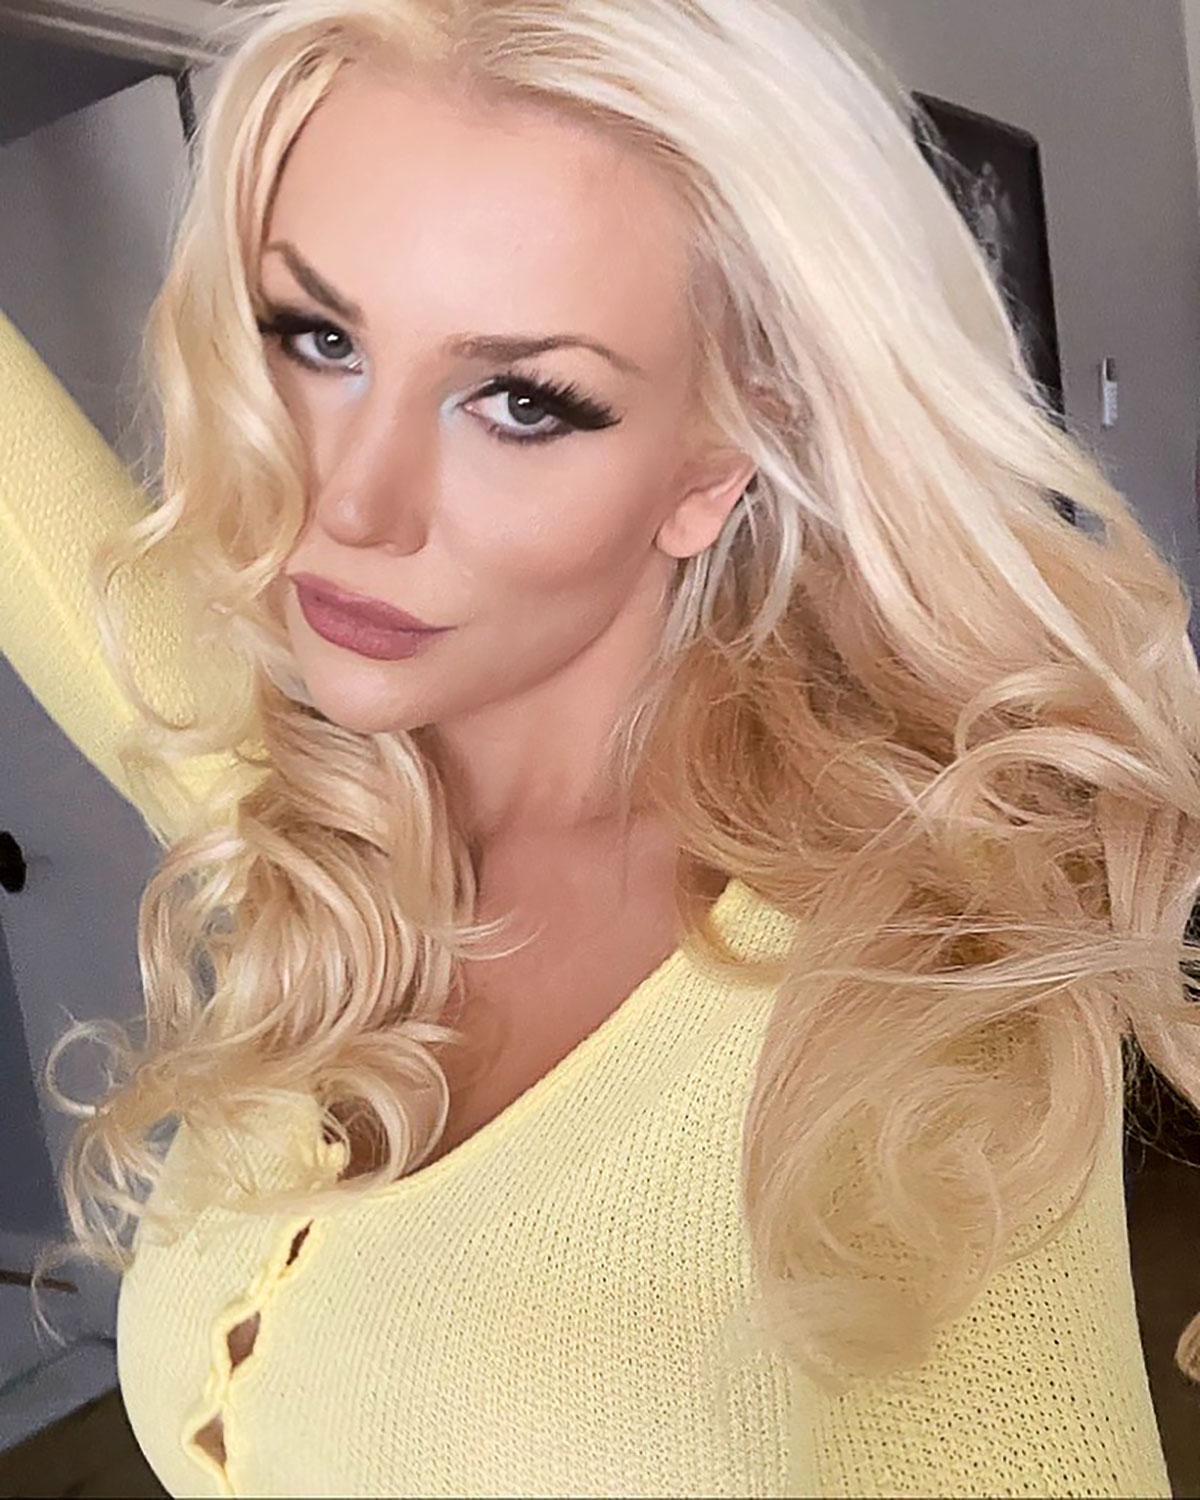 Courtney Stodden Hardcore Porn - Courtney Stodden Comes Out as Non-Binary: 'My Spirit Is Fluid'